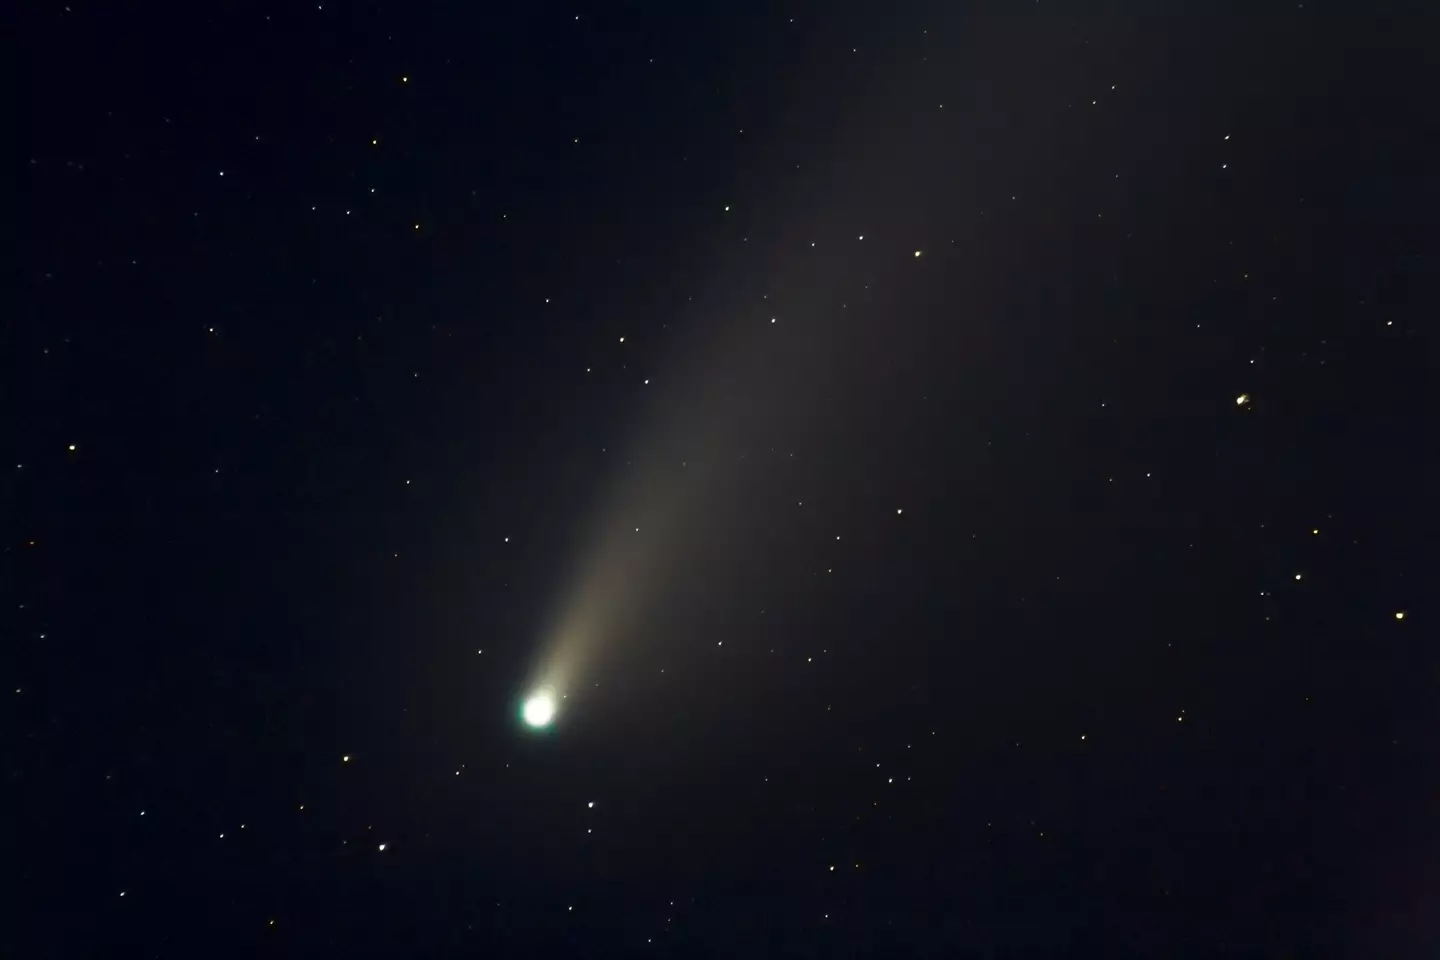 Astronomers believe we will be able to see the comet, known as C/2022 E3 (ZTF) as early as January 26.